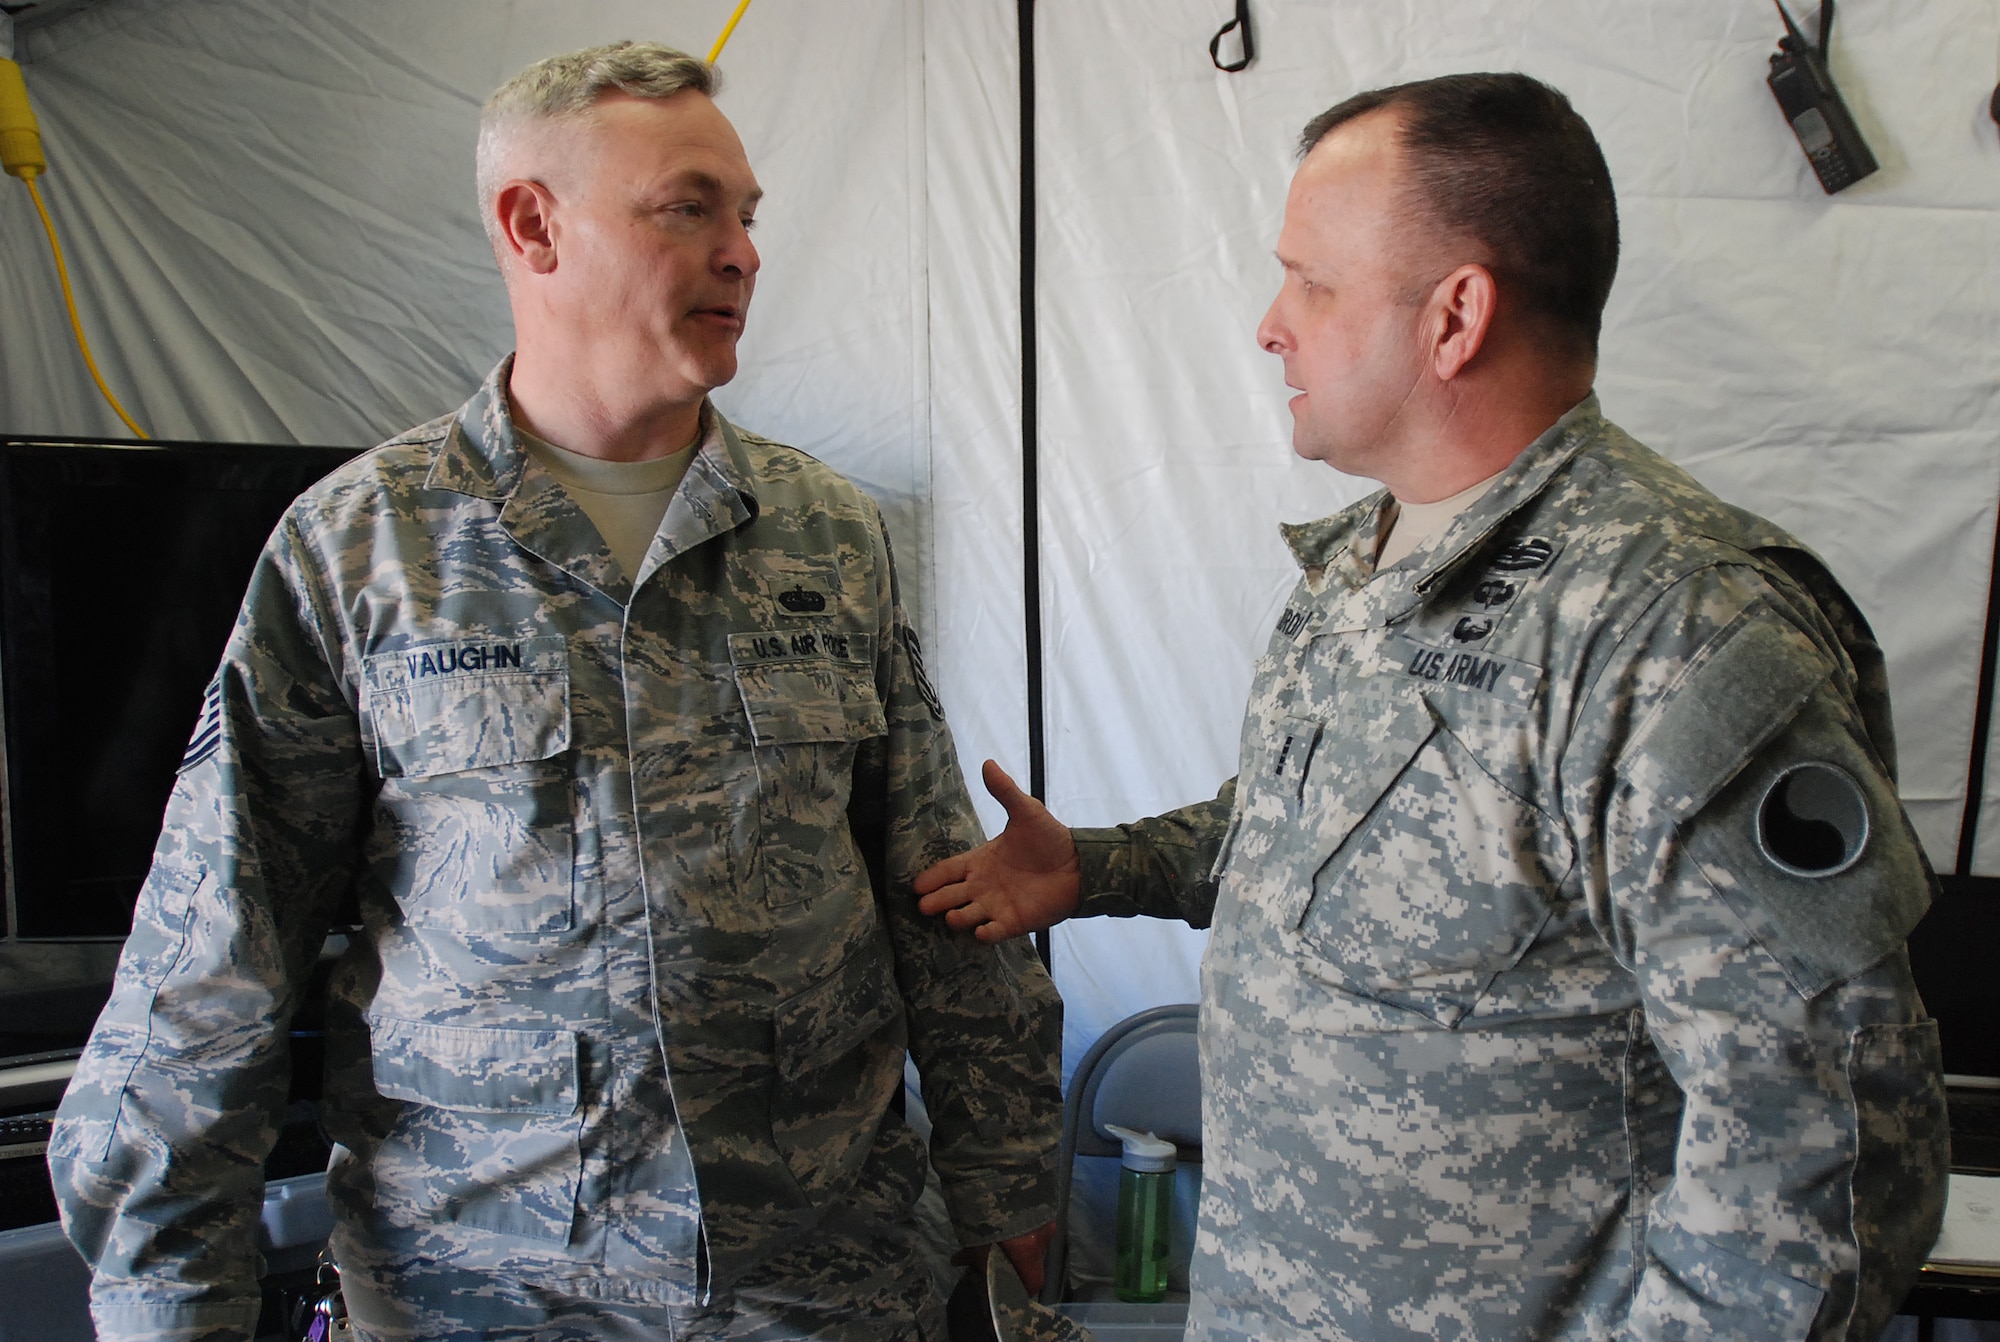 Tech Sgt. Kevin Vaughn (left), an interoperability coordinator with the South Carolina Air National Guard’s 169th Communications Flight and Chief Warrant Officer 4 Ed Marquis (right), a tactical communications officer with the Virginia Army National Guard’s 29th Infantry Division, discuss interagency communication at a Vigilant Guard exercise March 8, 2015 in Georgetown, S.C. Vigilant Guard is a series of federally funded disaster-response drills conducted by National Guard units working with federal, state and local emergency management agencies and first responders. (U.S. Army National Guard photo by Master Sgt. A.J. Coyne/Released)